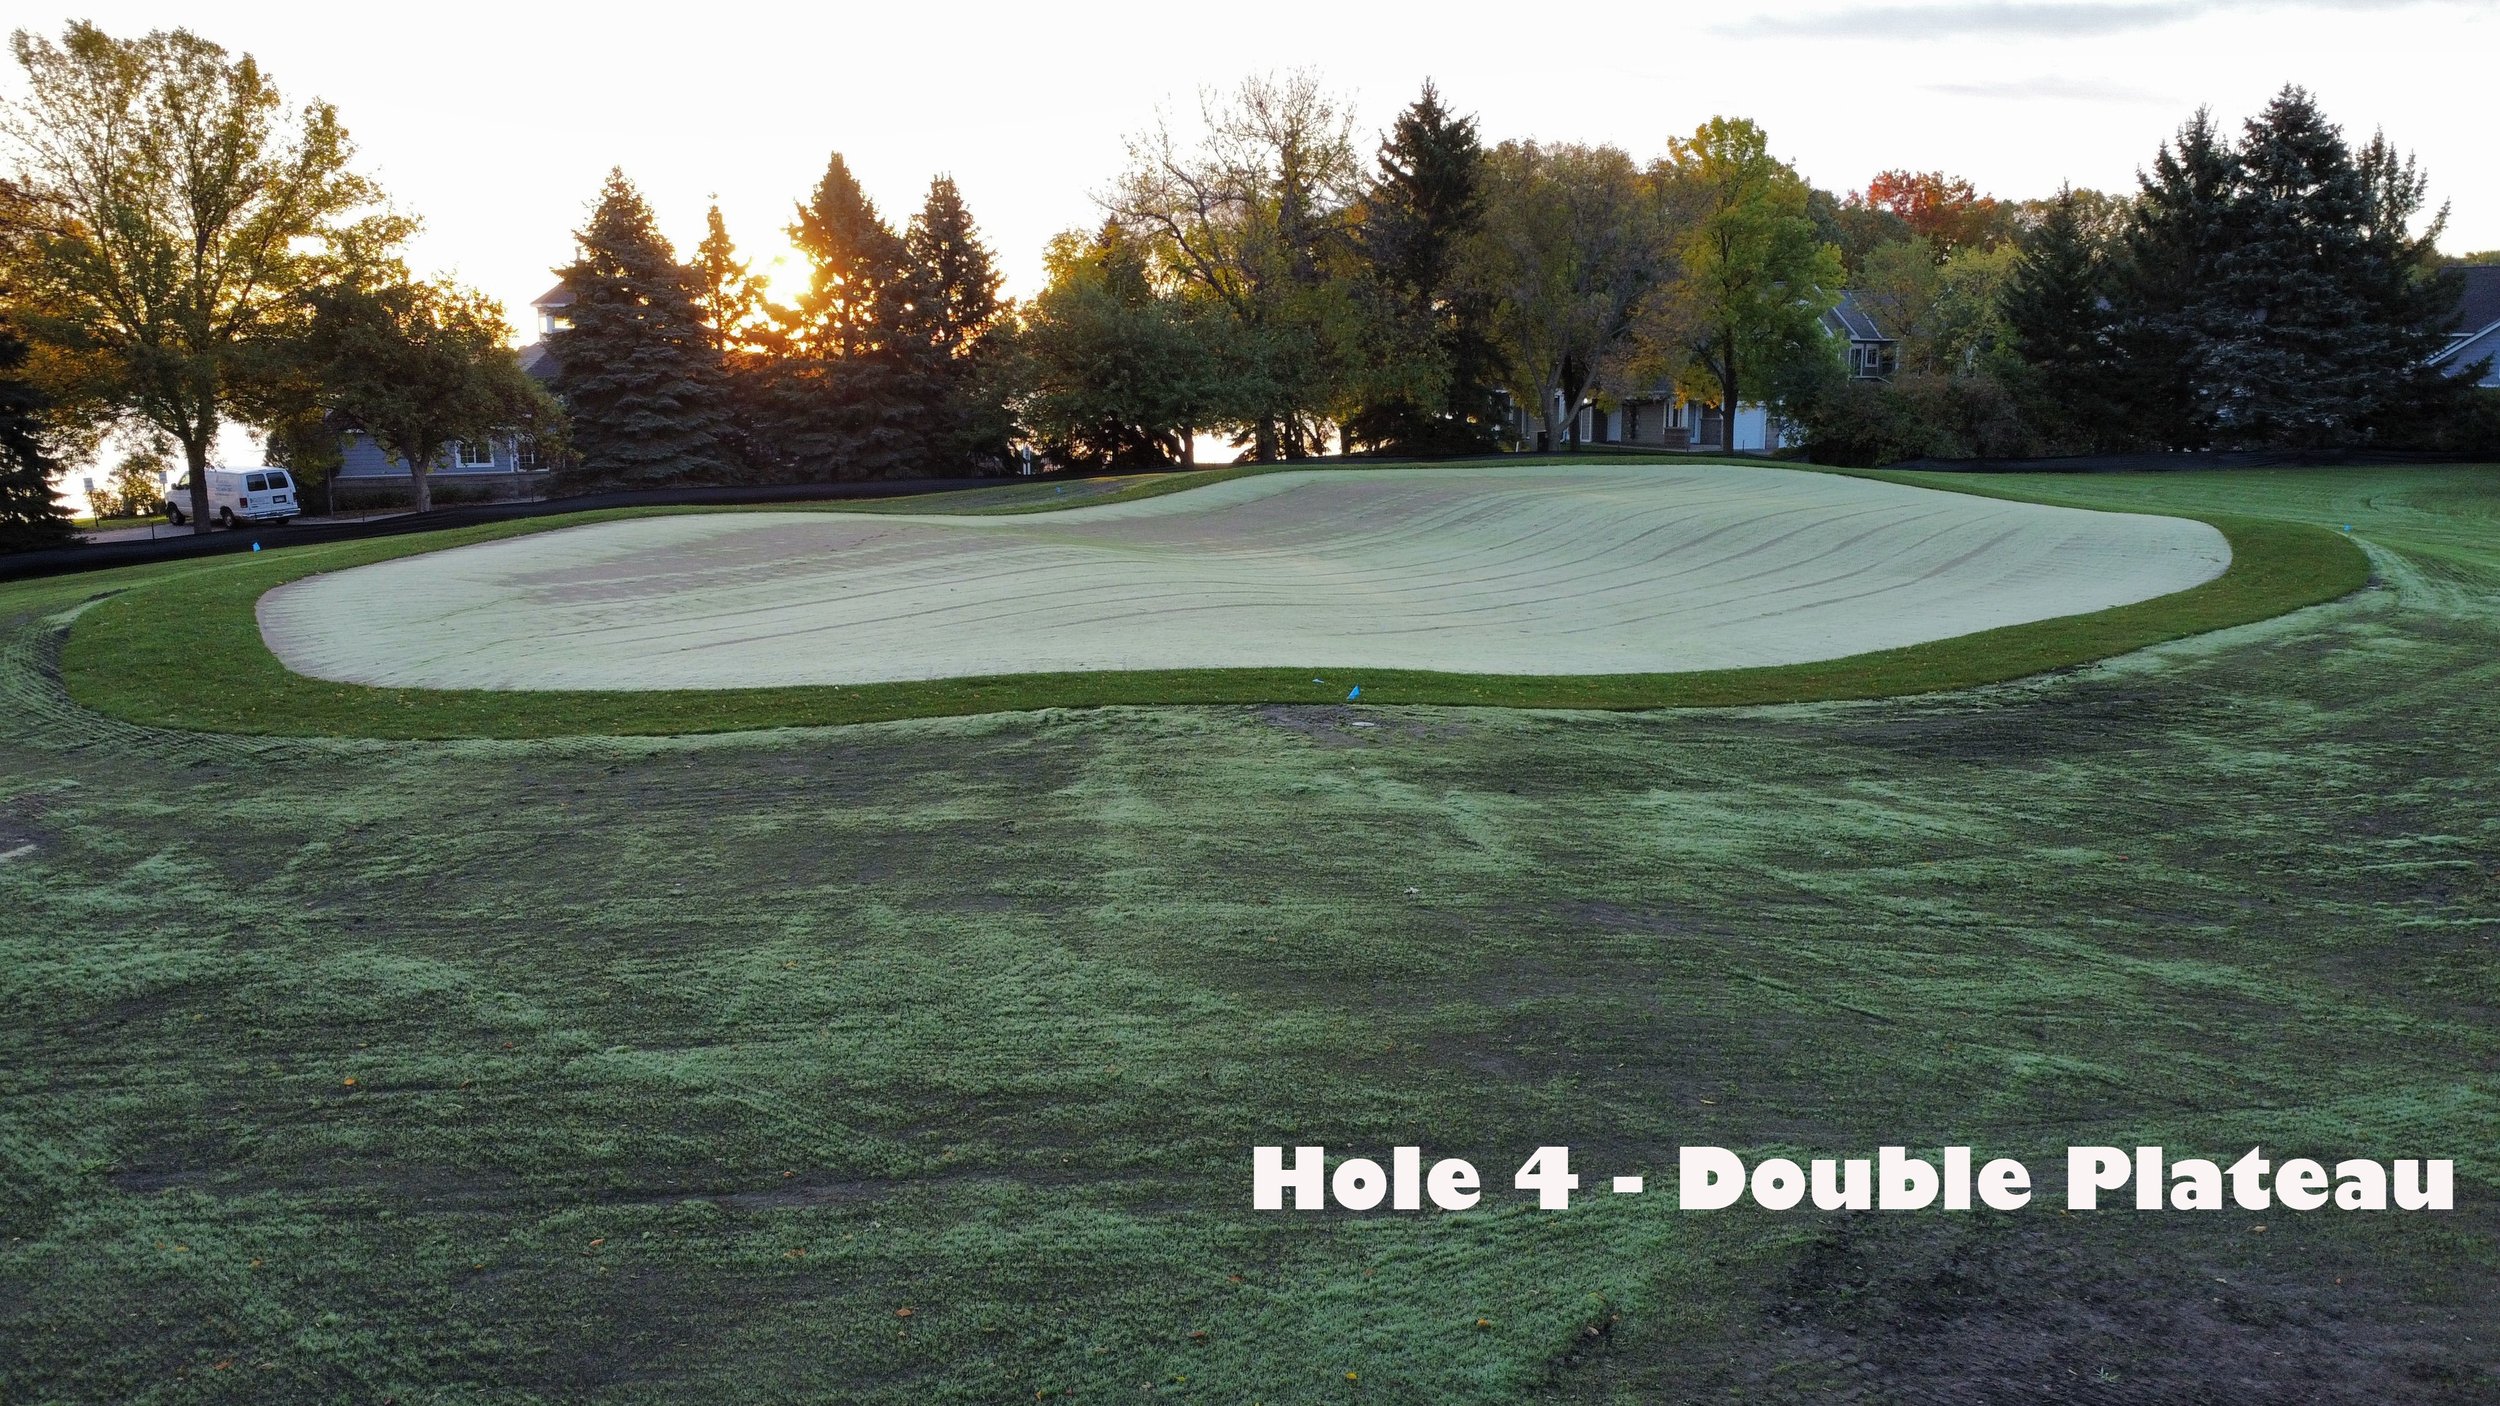  #4 Double Plateau - 73 Yards Green Shaped by Jonathan Reisetter  As golfers reach the highest point of the Loop they’ll find our elegant version of the double plateau green.   The front plateau will accept a delicate pitch or a running approach. Pin